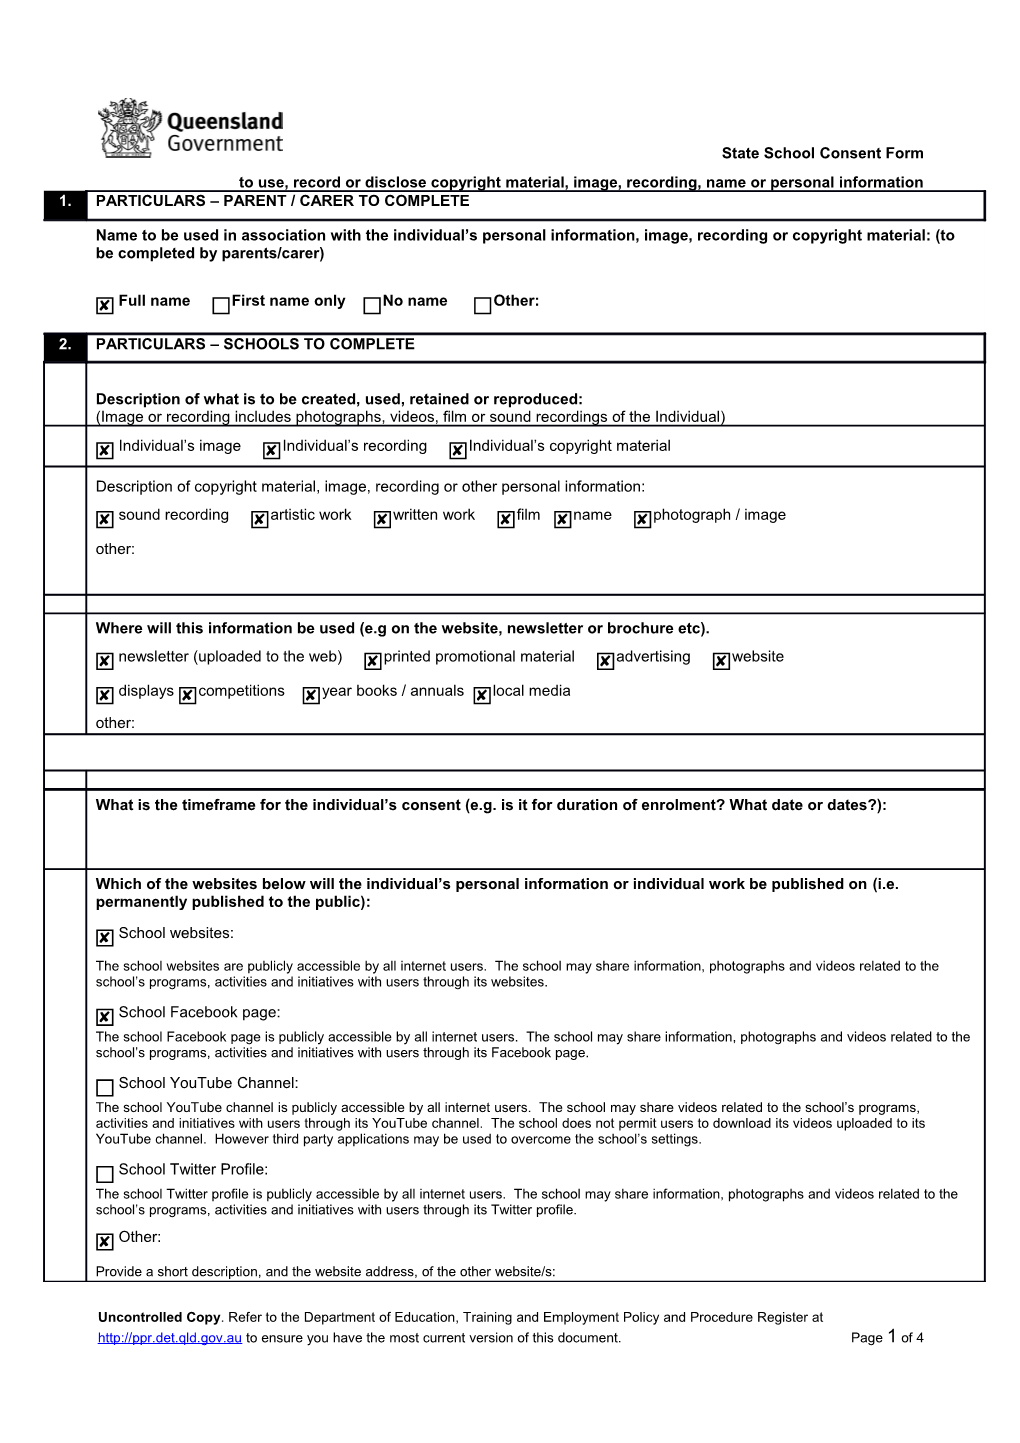 State School Consent Form